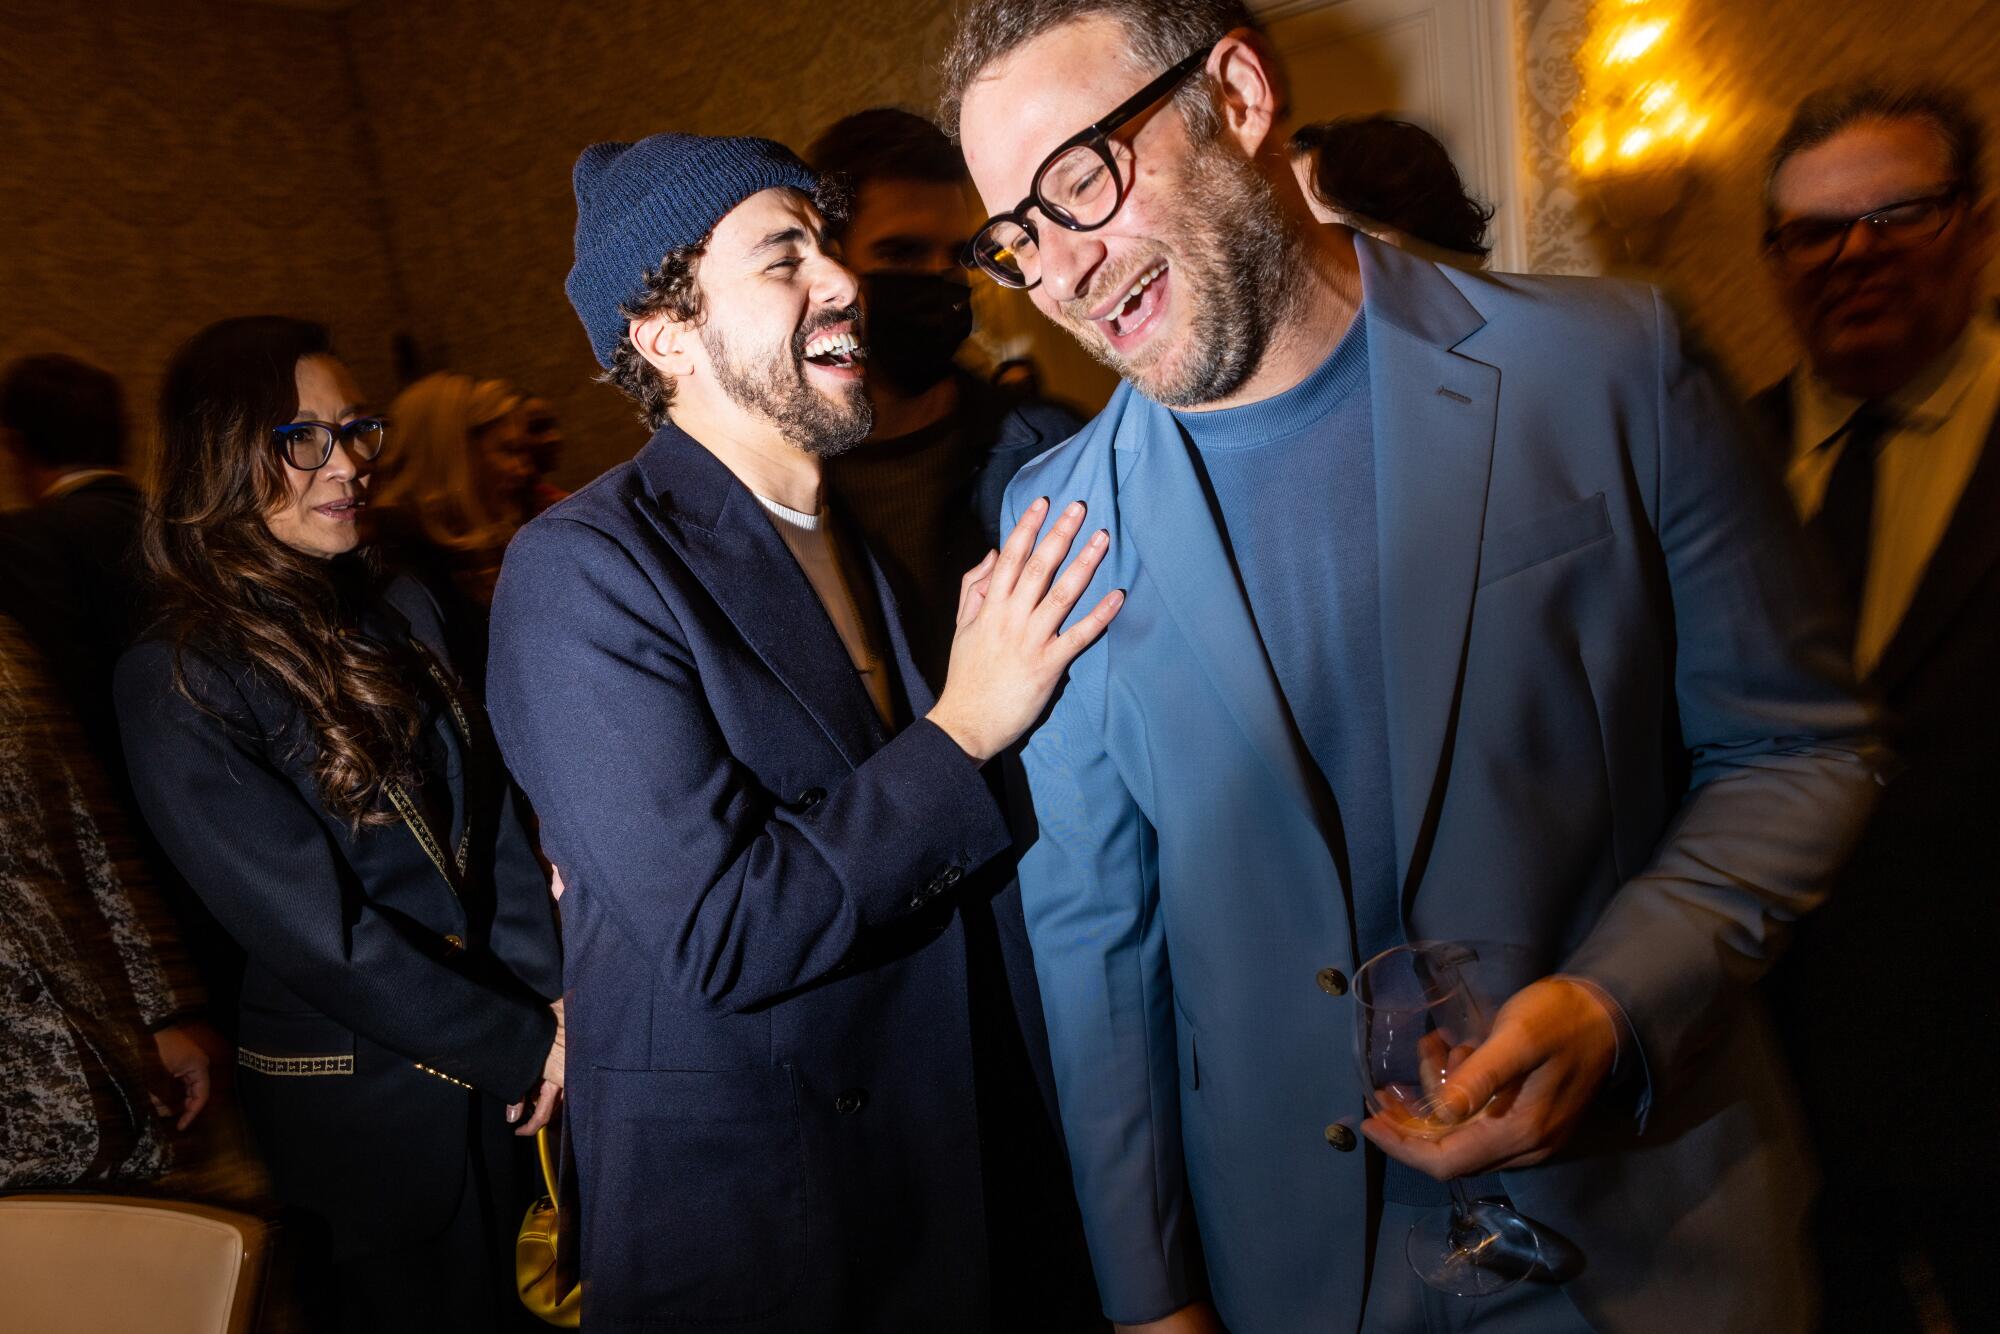 Comedian Ramy Youssef of the show "Mo" with Seth Rogan of "The Fabelmans."